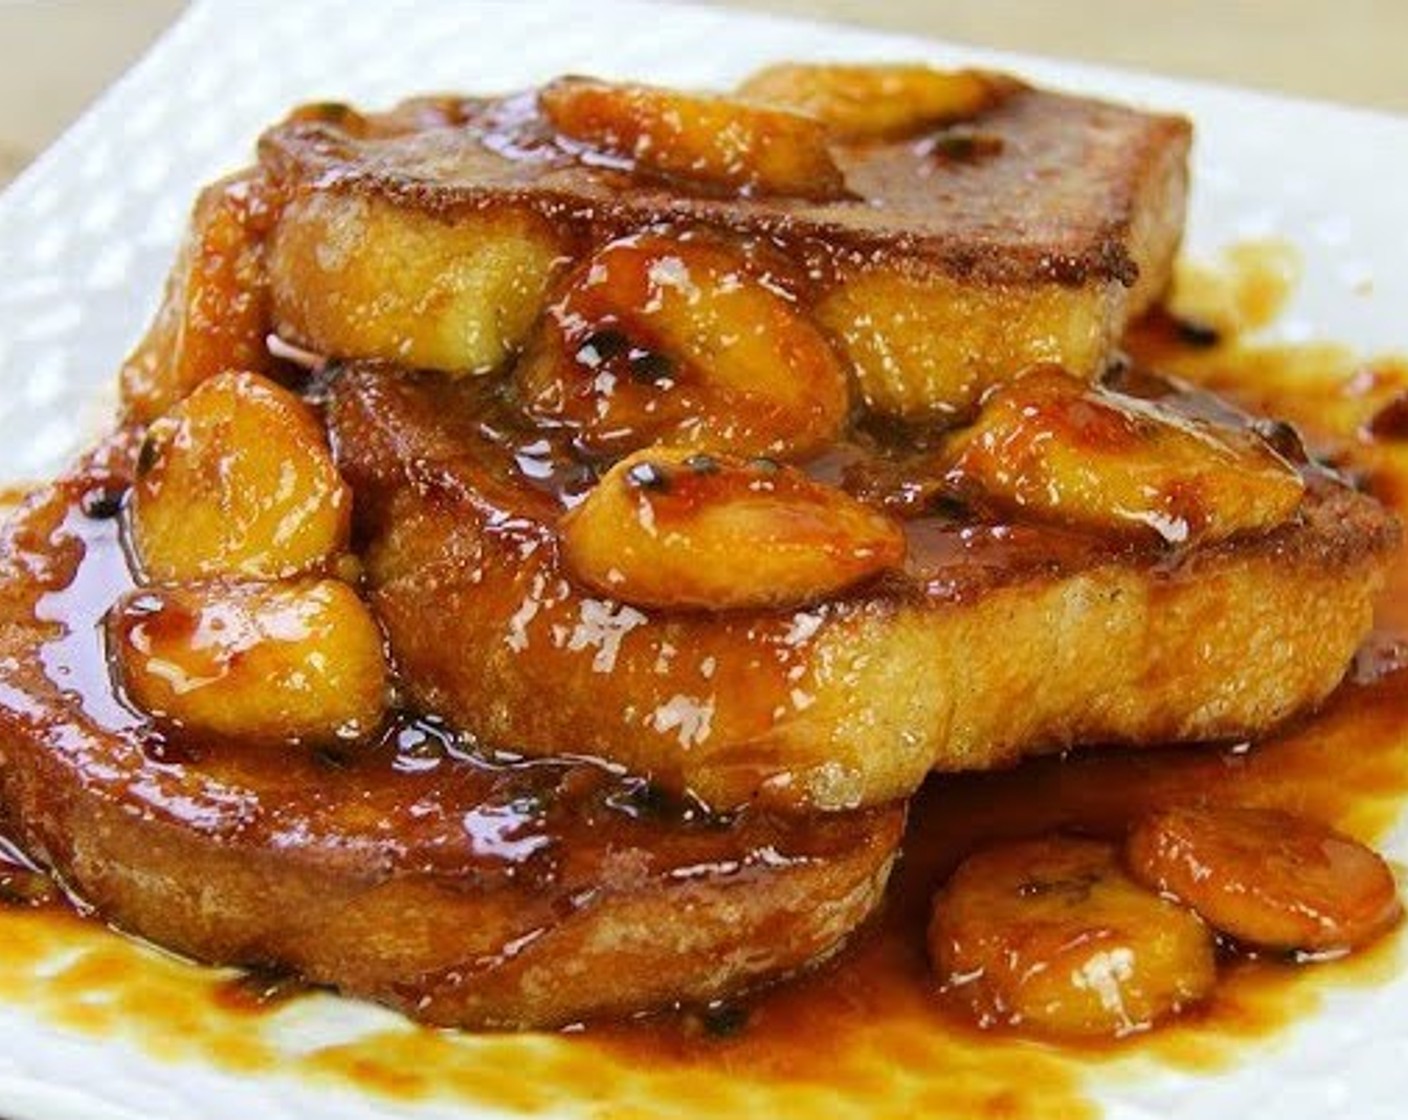 Coconut French Toast with Caramel Passionfruit Sauce